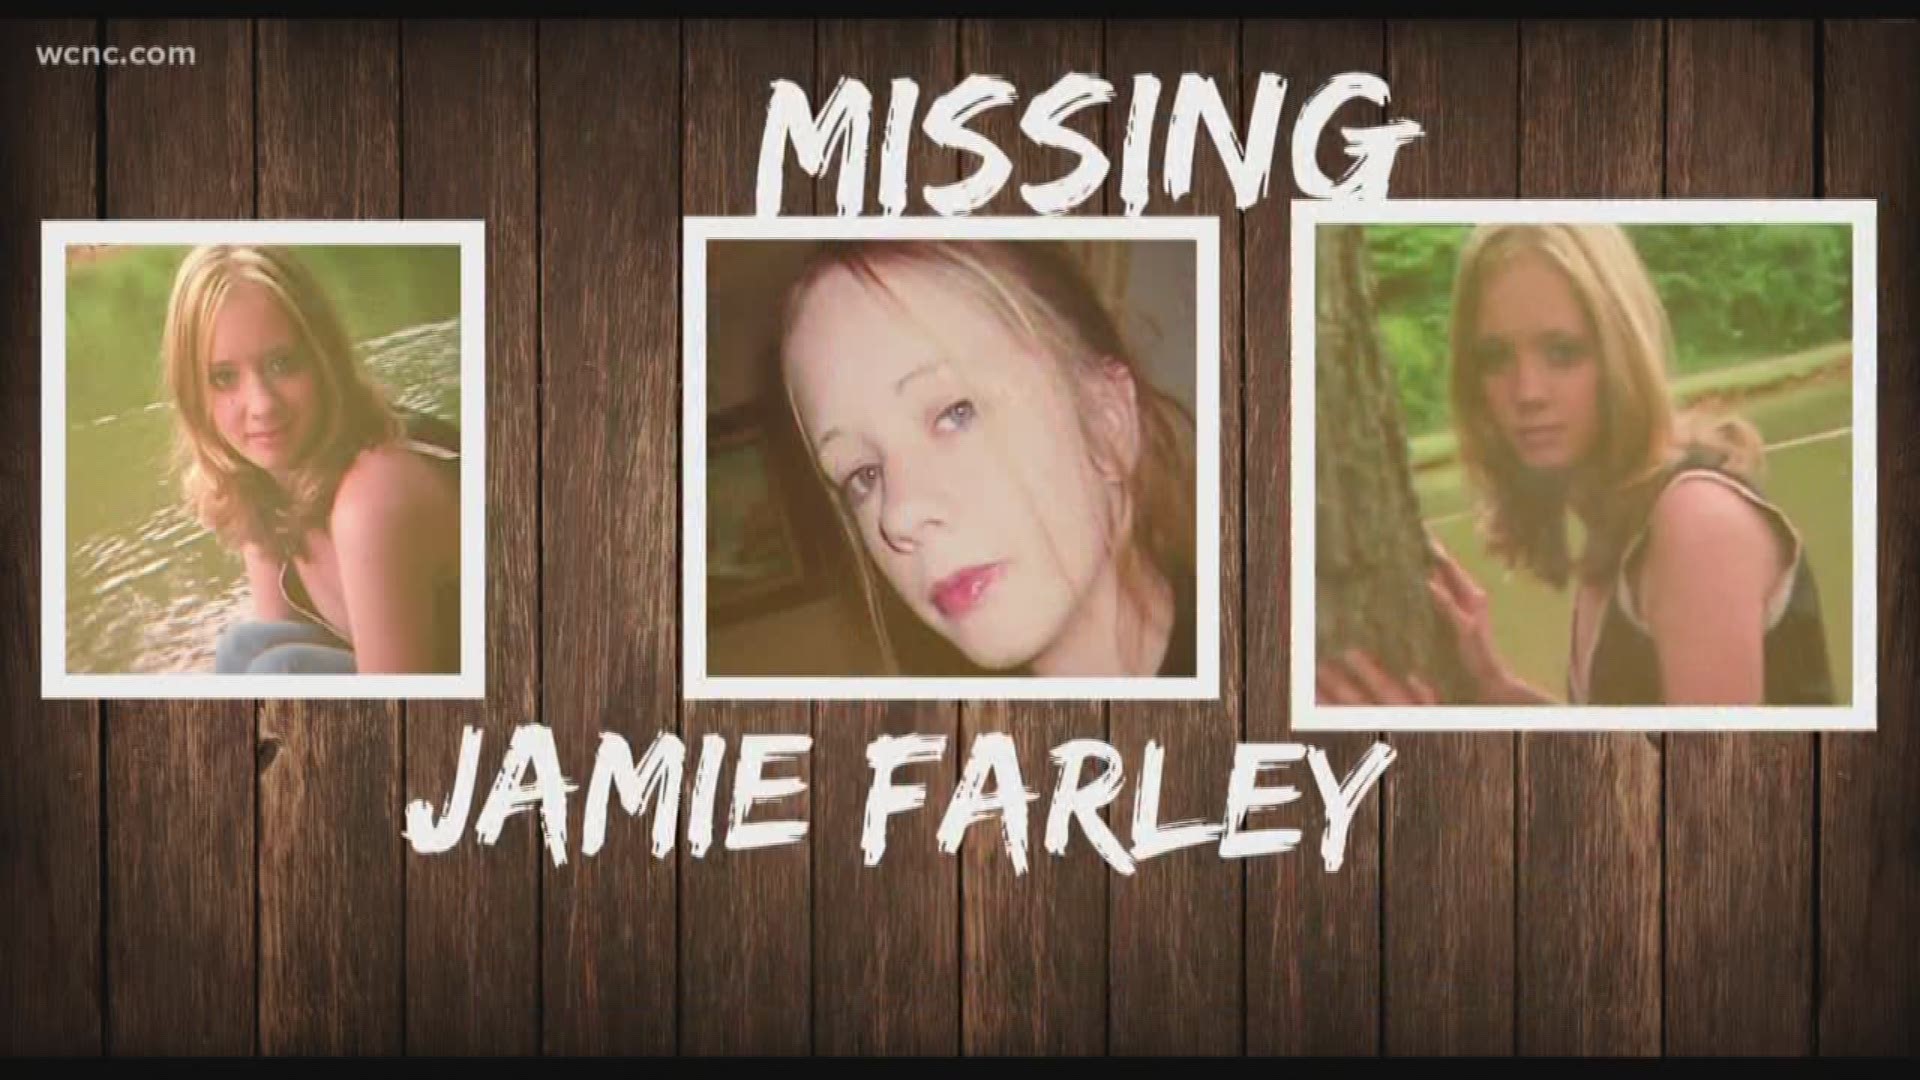 Eleven years later, Jamie Fraley is still missing